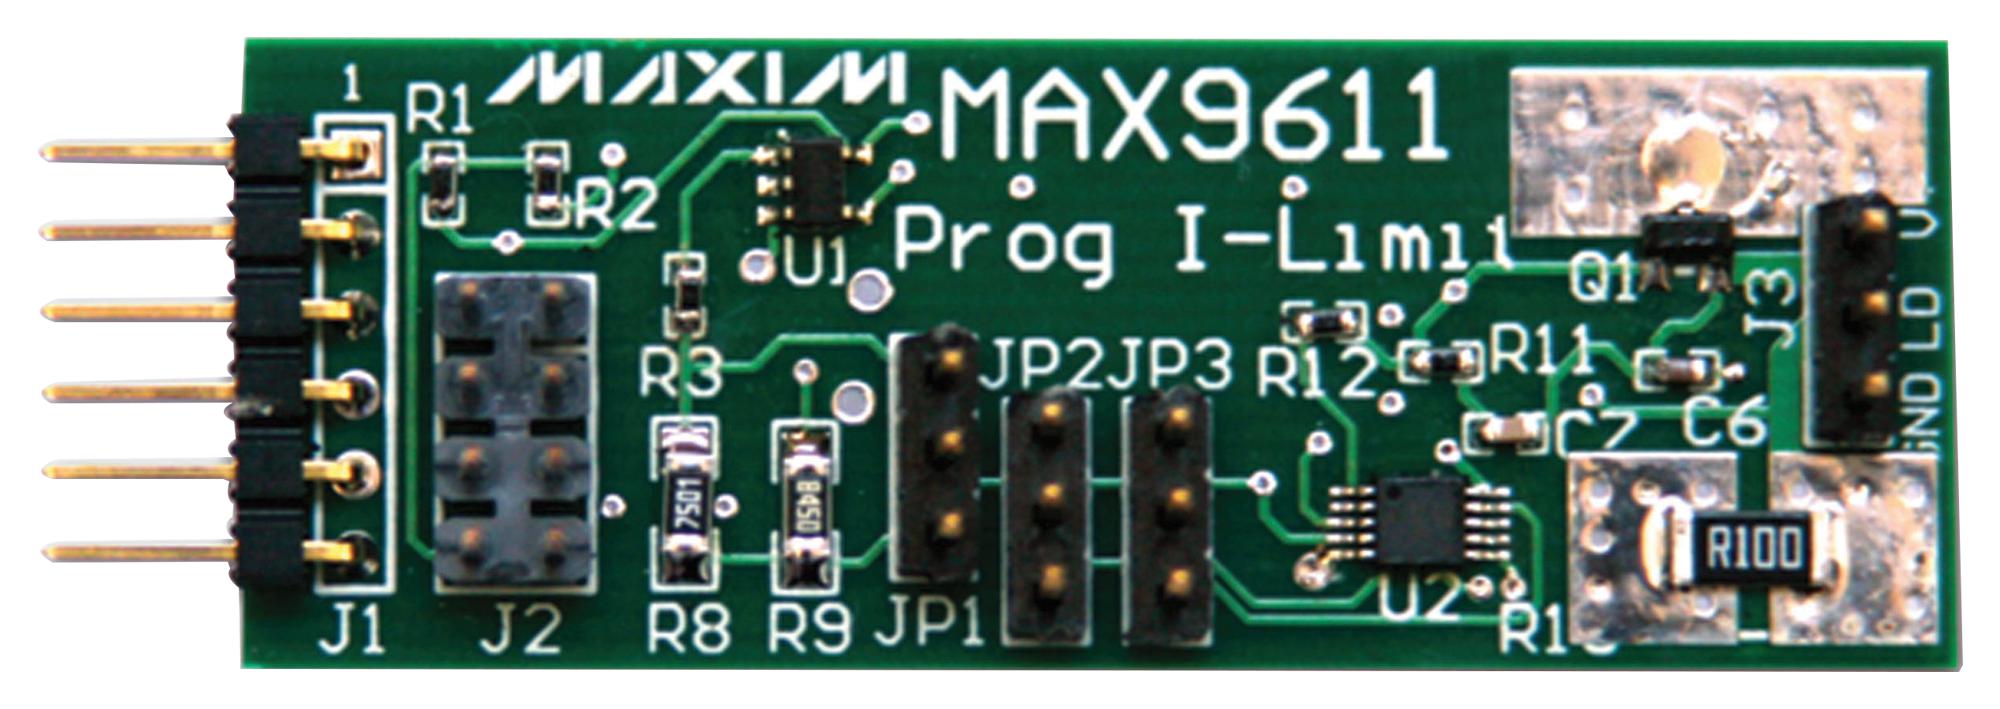 MAX9611PMB1# EVALUATION BOARD, CURRENT SENSE AMP MAXIM INTEGRATED / ANALOG DEVICES